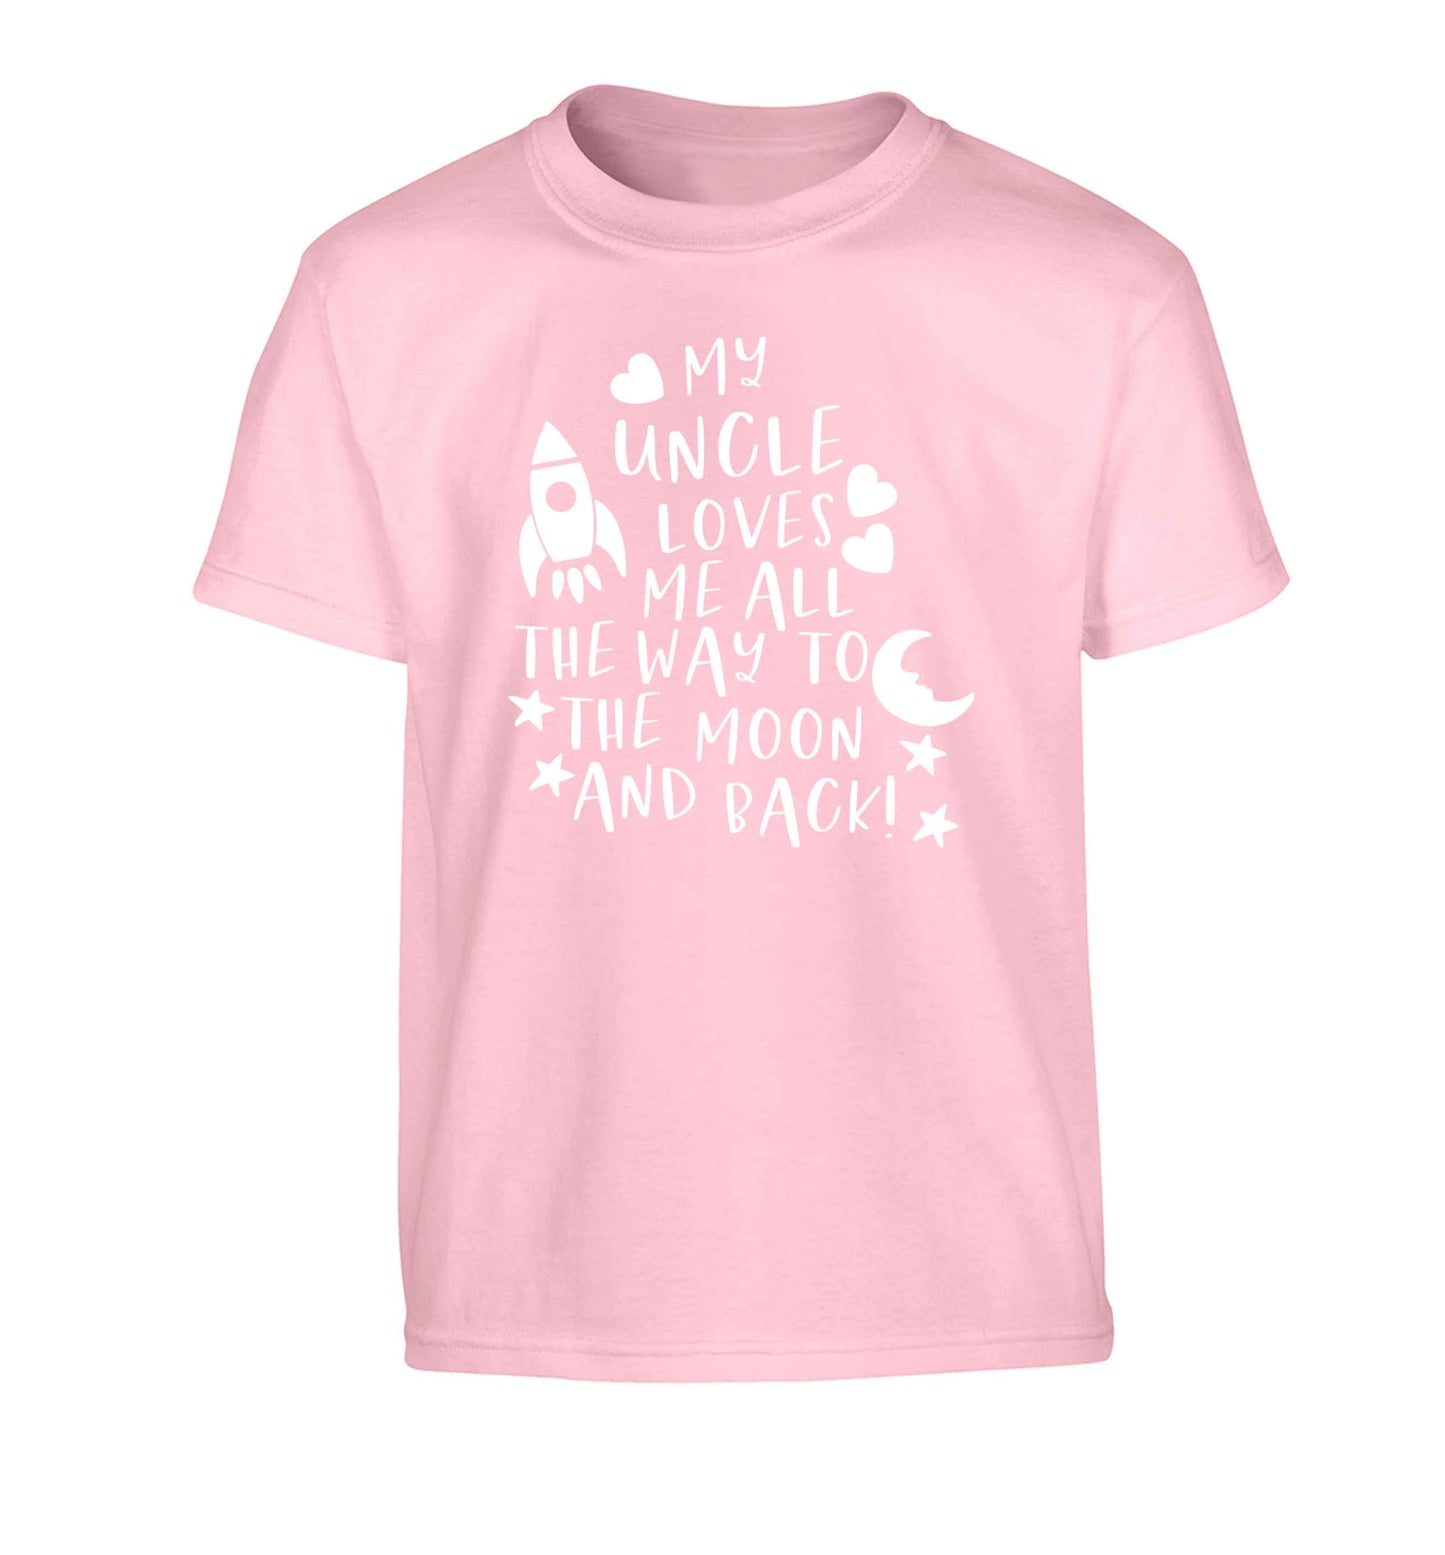 My uncle loves me all the way to the moon and back Children's light pink Tshirt 12-13 Years